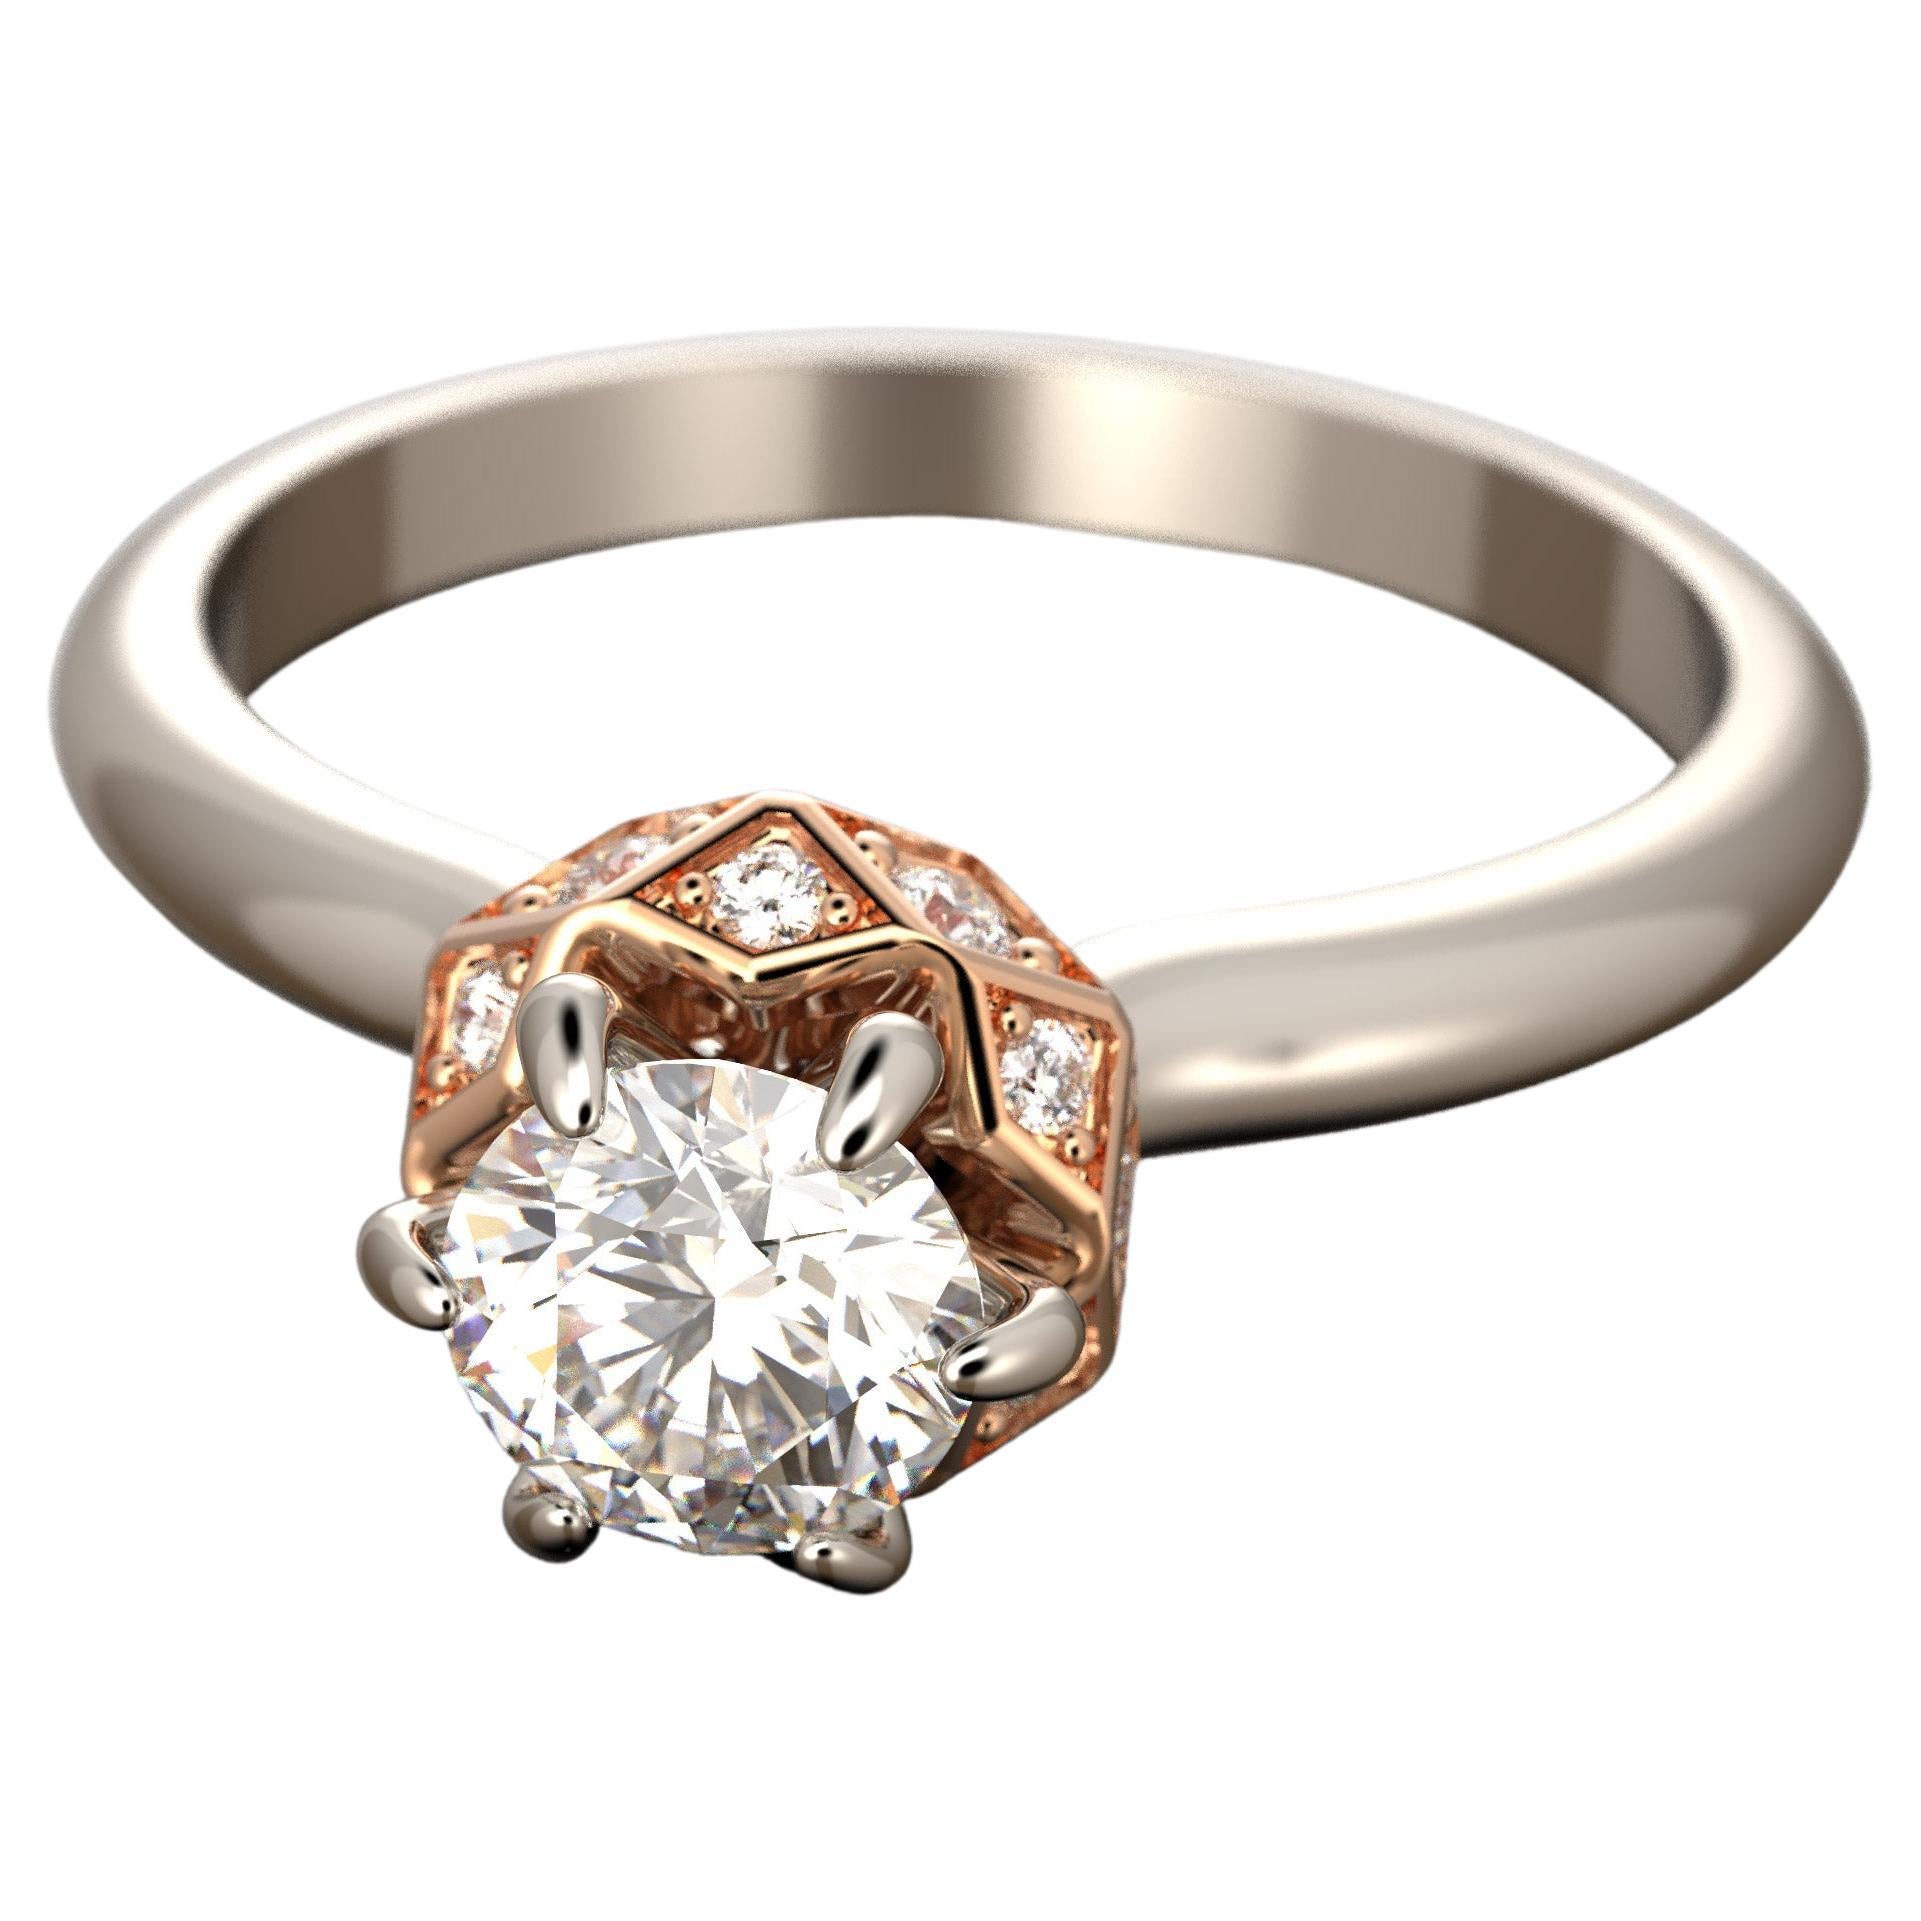 Diamond Engagement Ring Made in Italy, GIA Certified 0.5 Carat Diamond